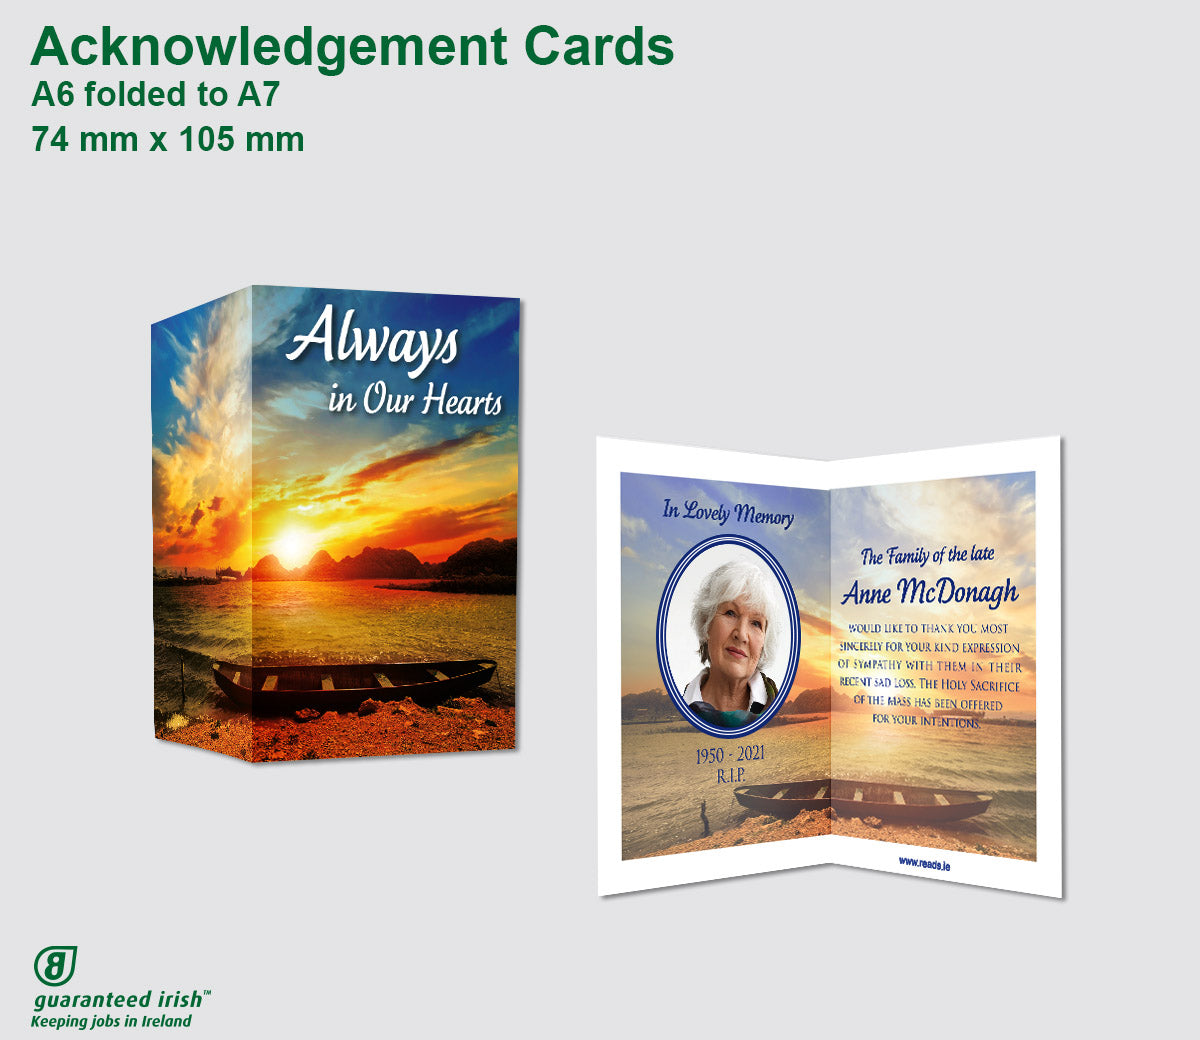 Acknowledgement Cards - Folded